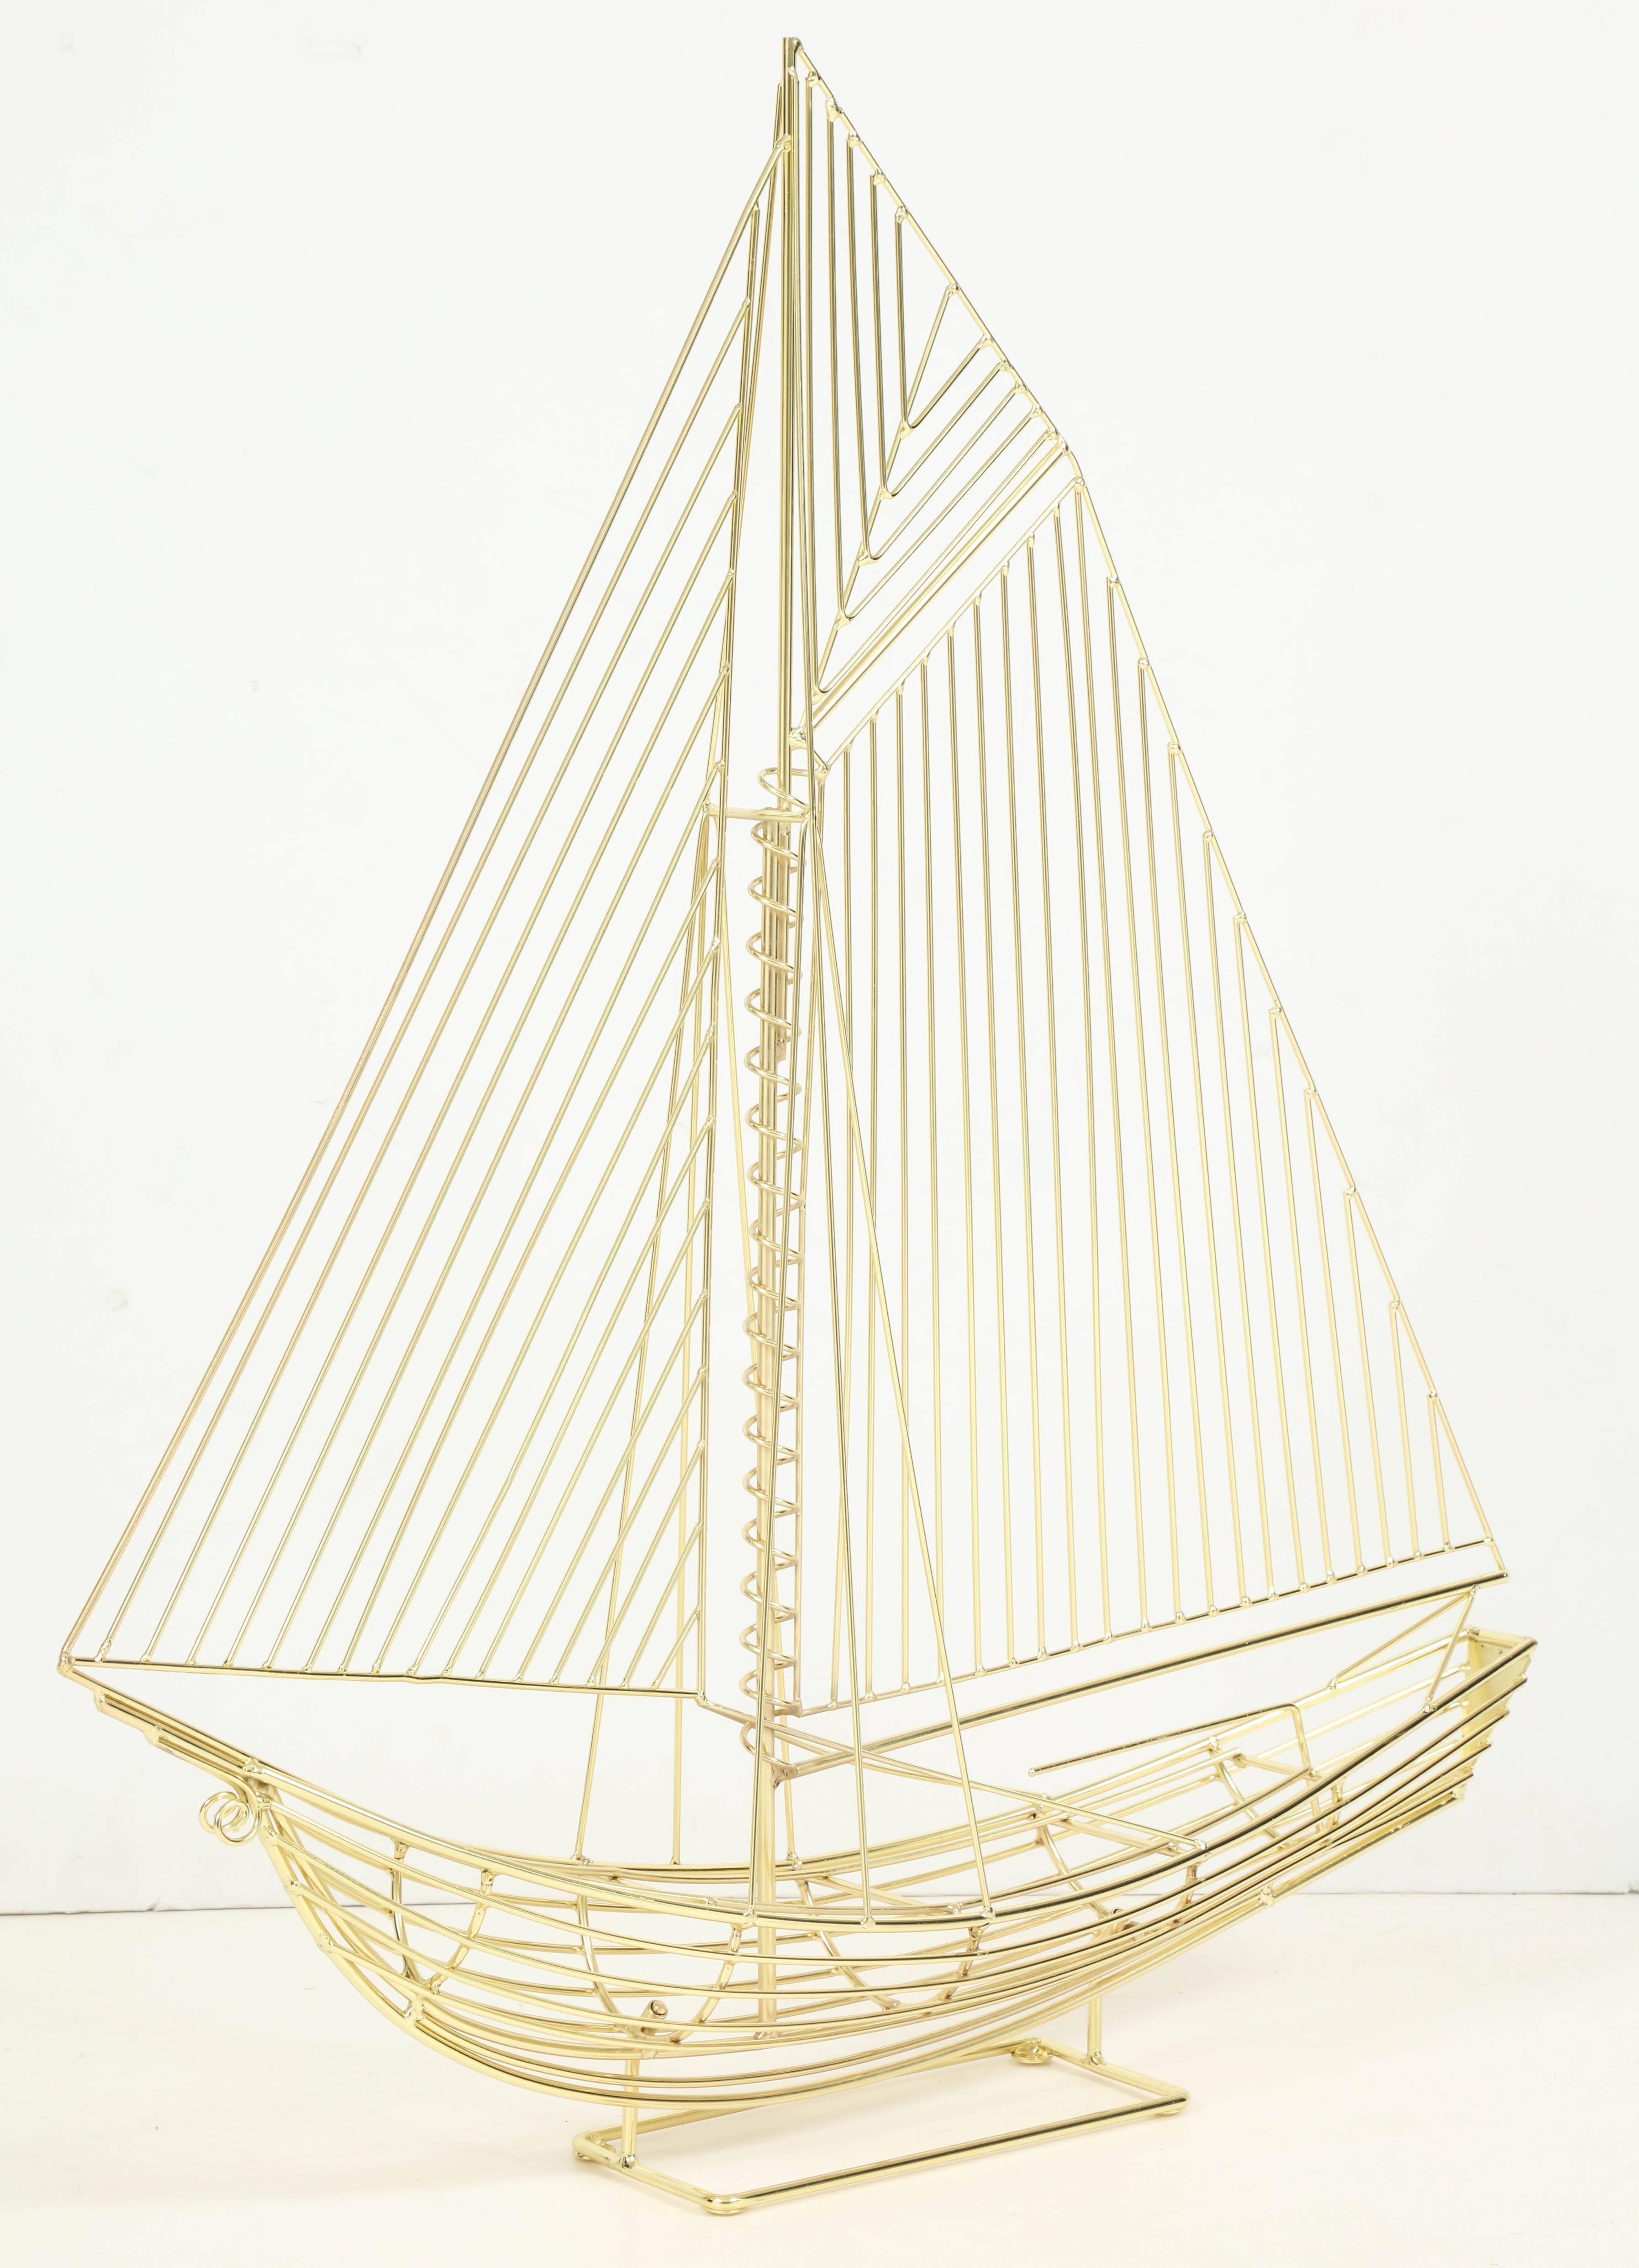 American Large Polished Brass Sail Boat Sculpture by Curtis Jere, Signed, circa 1970 For Sale